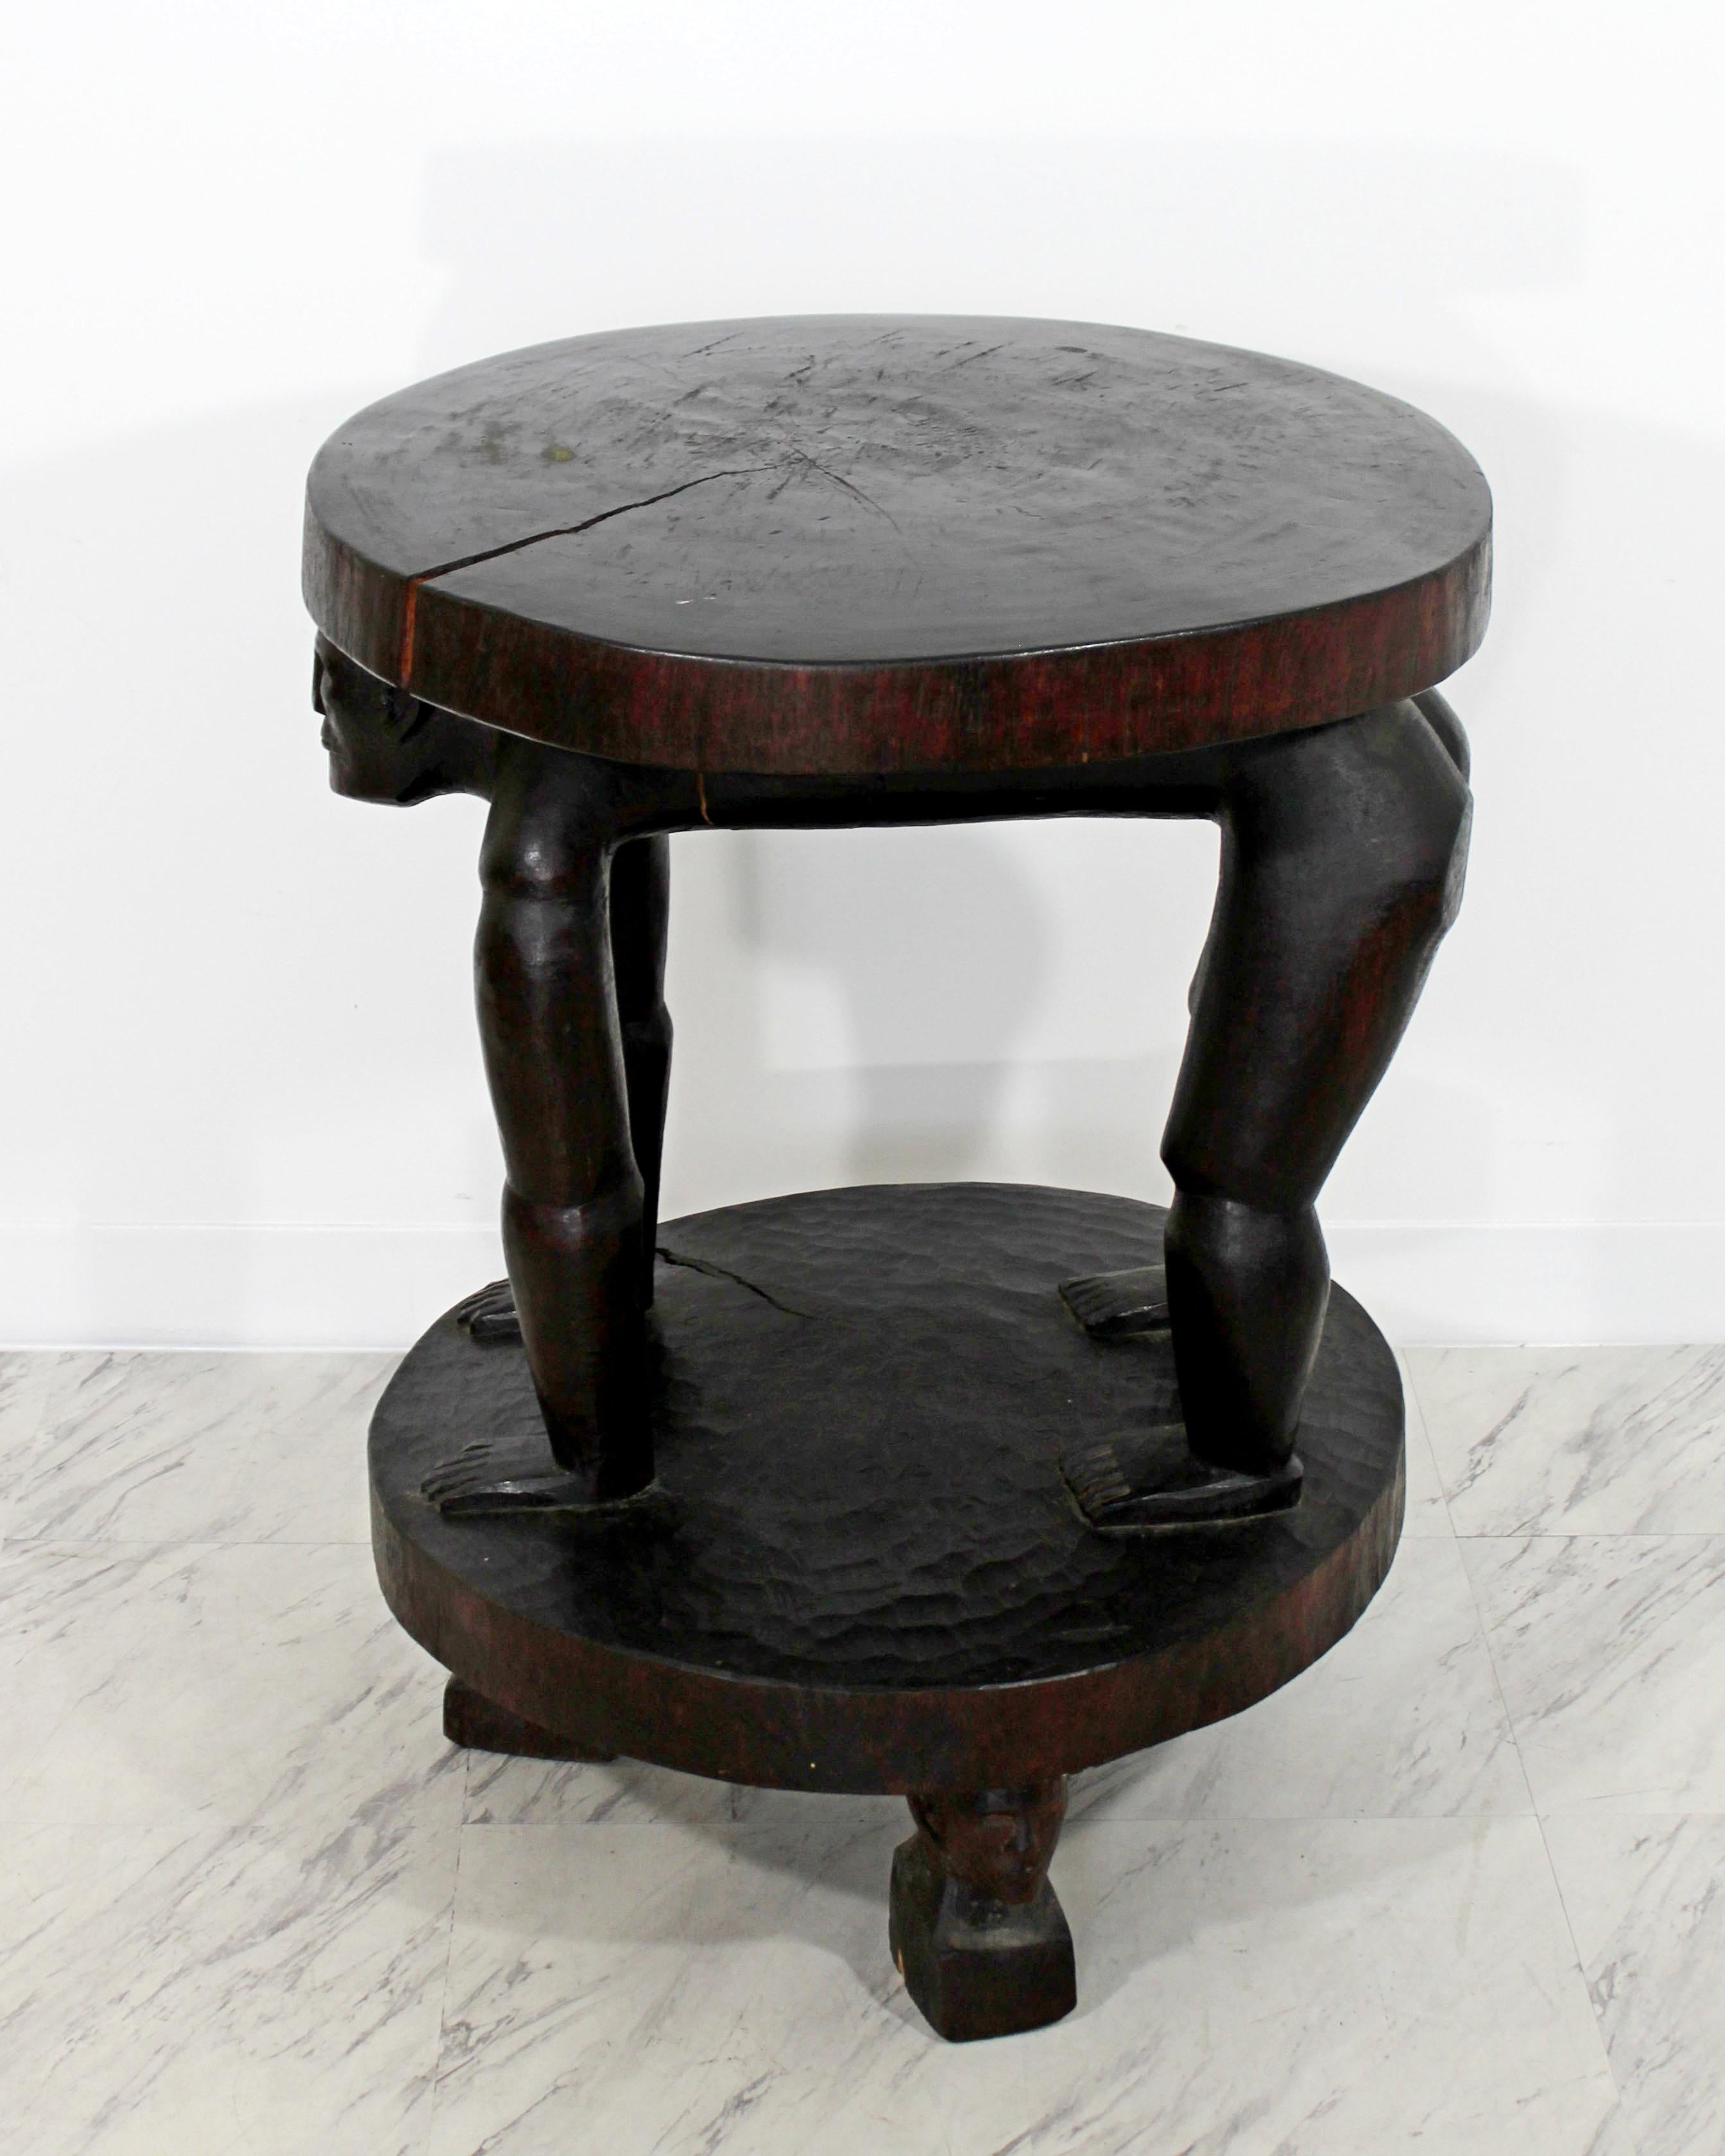 For your consideration is a vintage carved rosewood stool in the style of an African stool, in the shape of a monkey man on all fours. In vintage condition. The dimensions are 23.5